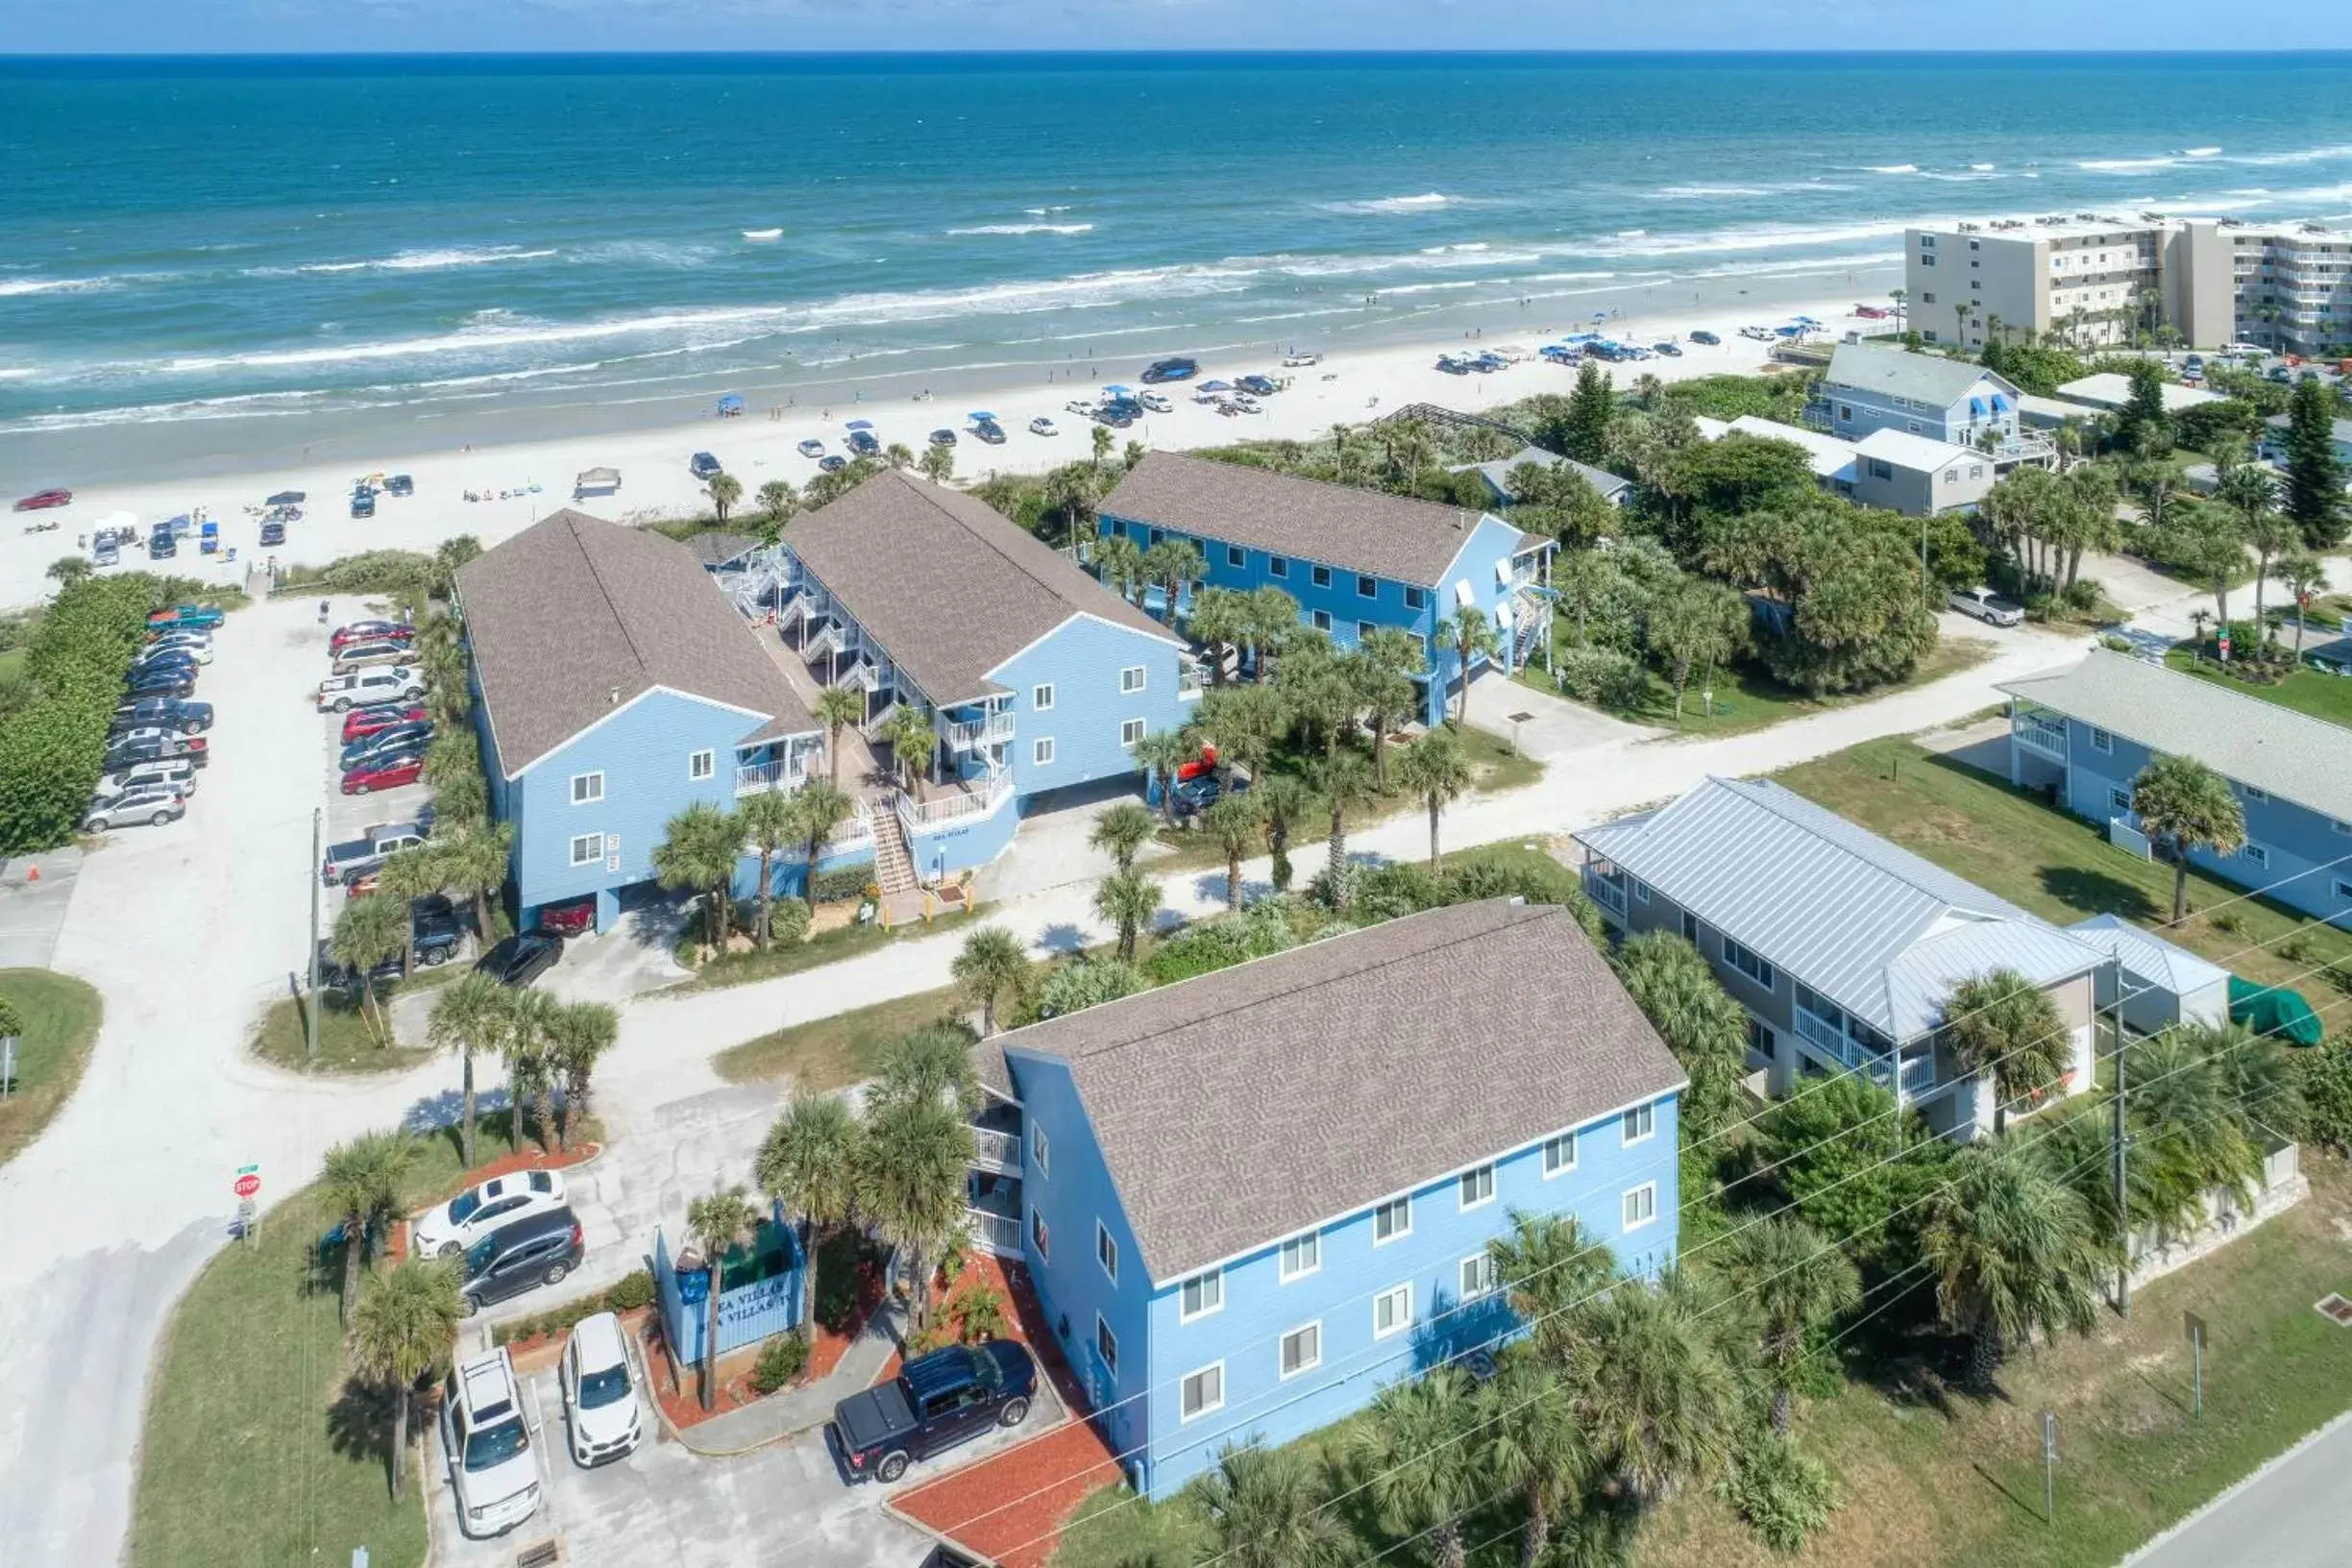 Property building, Bird's-eye View in New Smyrna Waves by Exploria Resorts